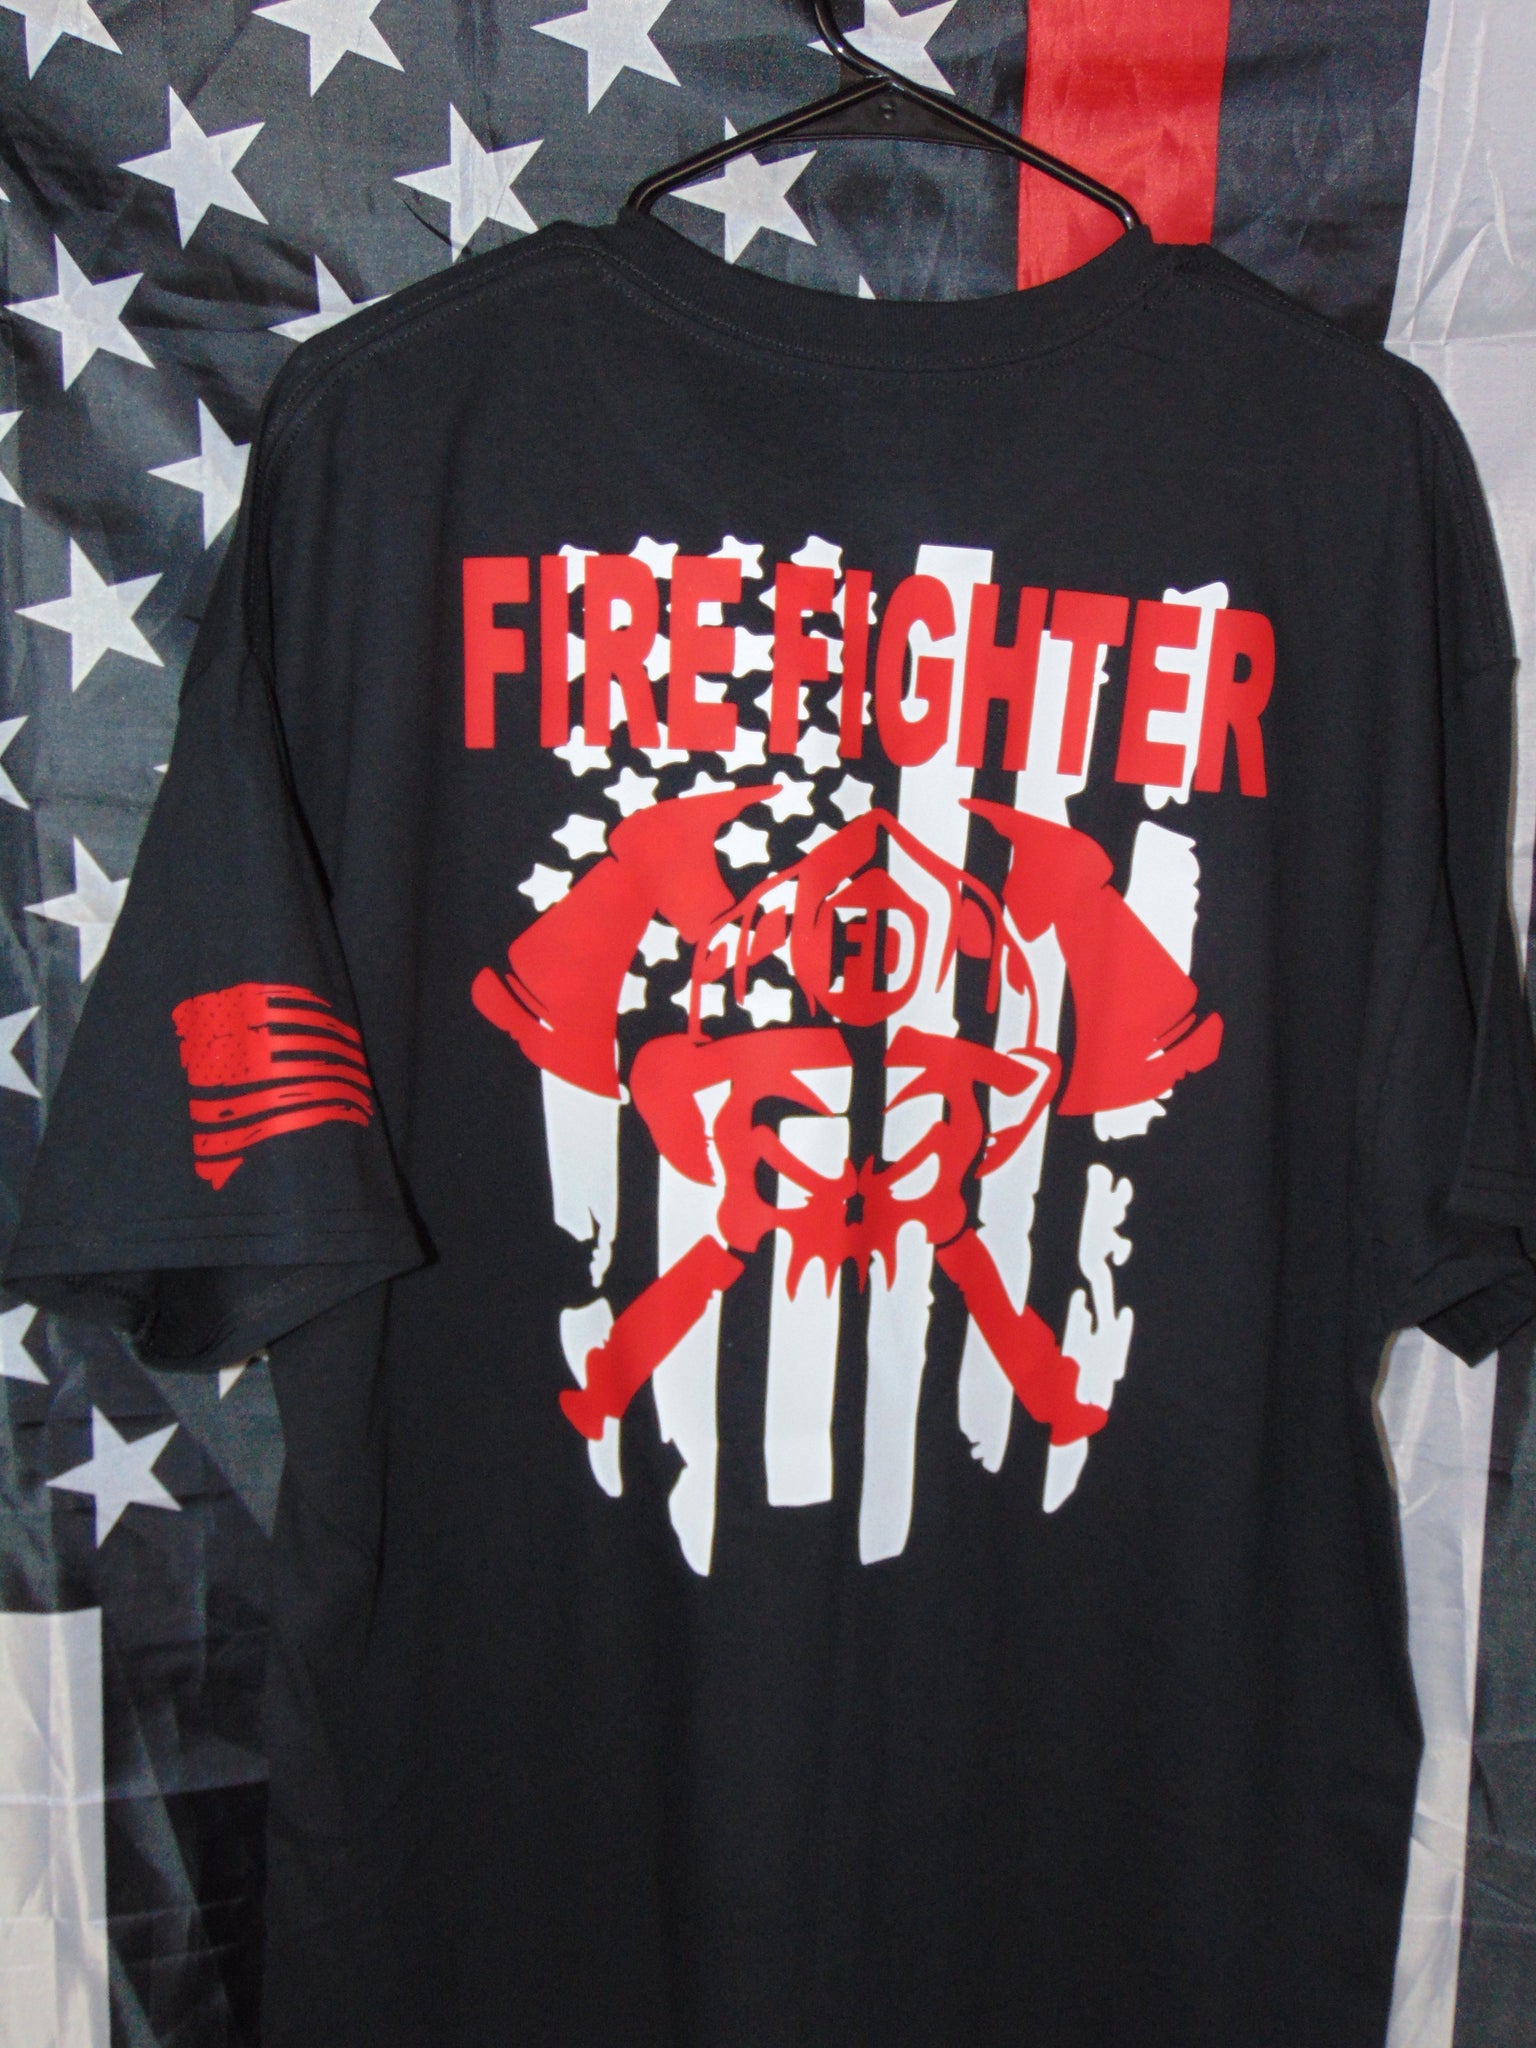 New firefighter t-shirts